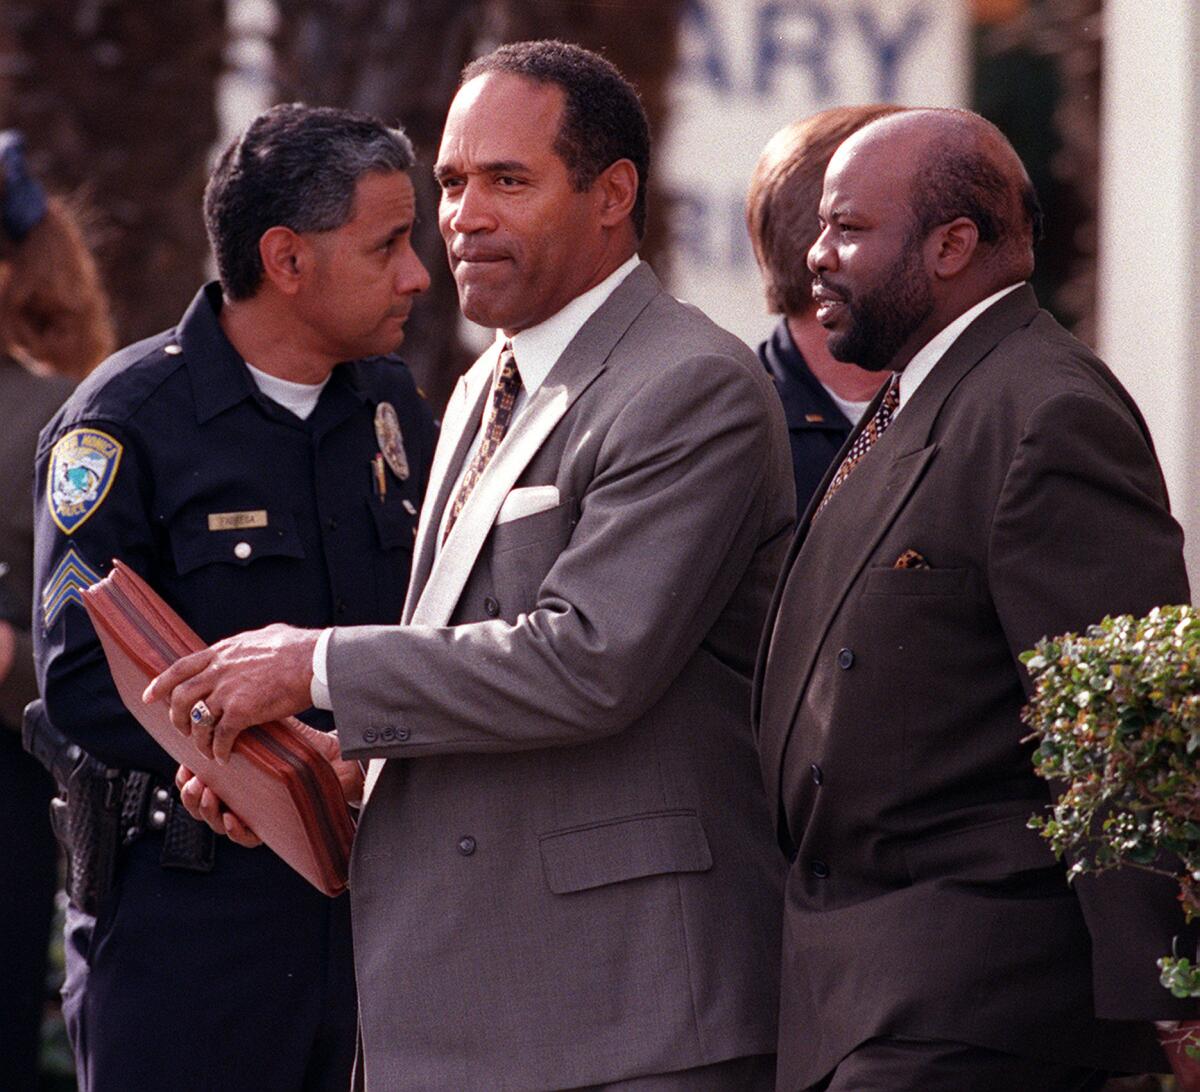 O.J. Simpson leaves a Santa Monica courthouse after his civil trial ended and the jury began deliberations on Jan. 18, 1997.